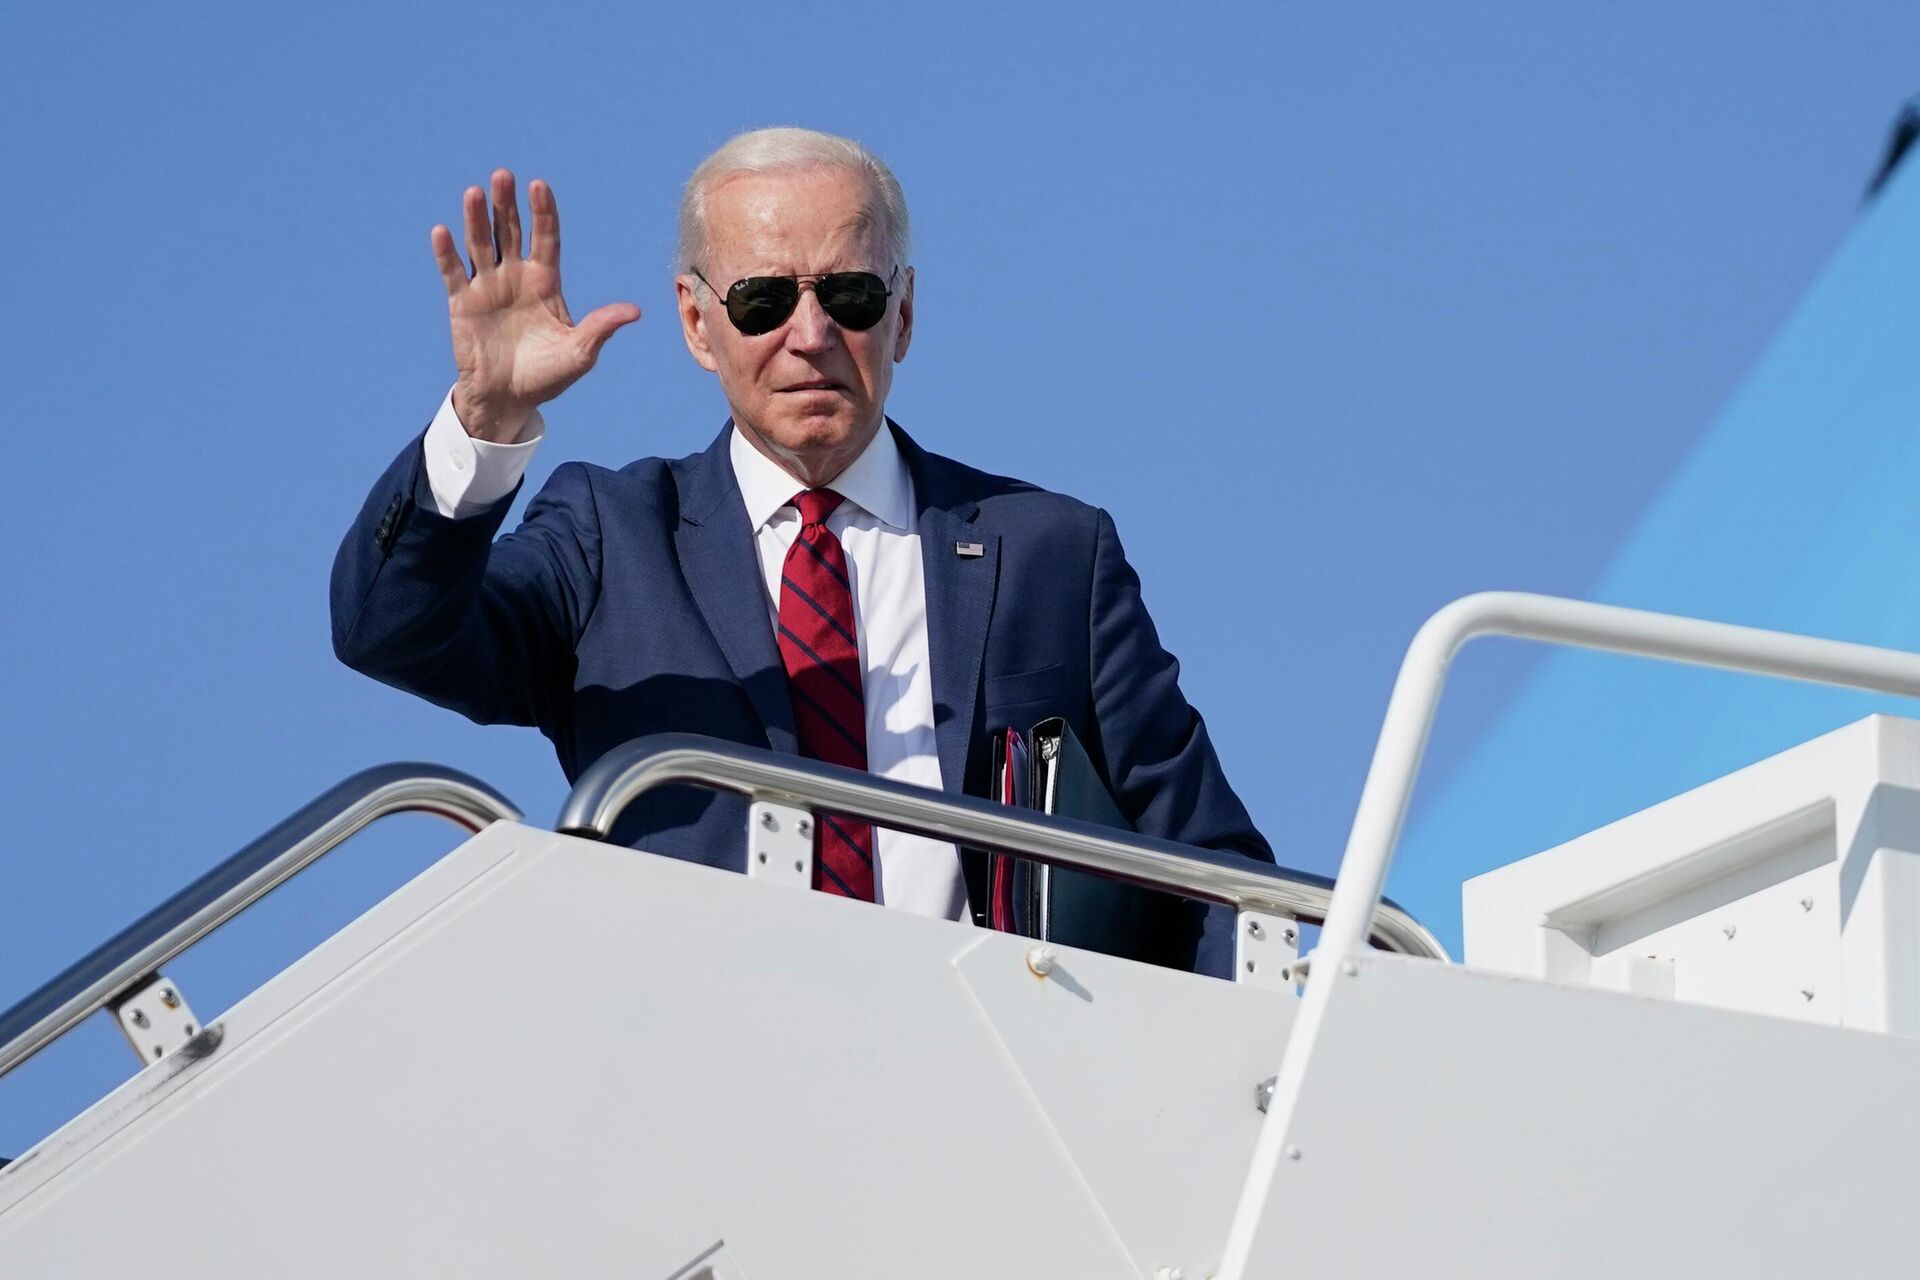 President Joe Biden boards Air Force One for a trip to New York to attend the United Nations General Assembly, Tuesday, Sept. 20, 2022, at Andrews Air Force Base, Md. - Sputnik International, 1920, 29.10.2022